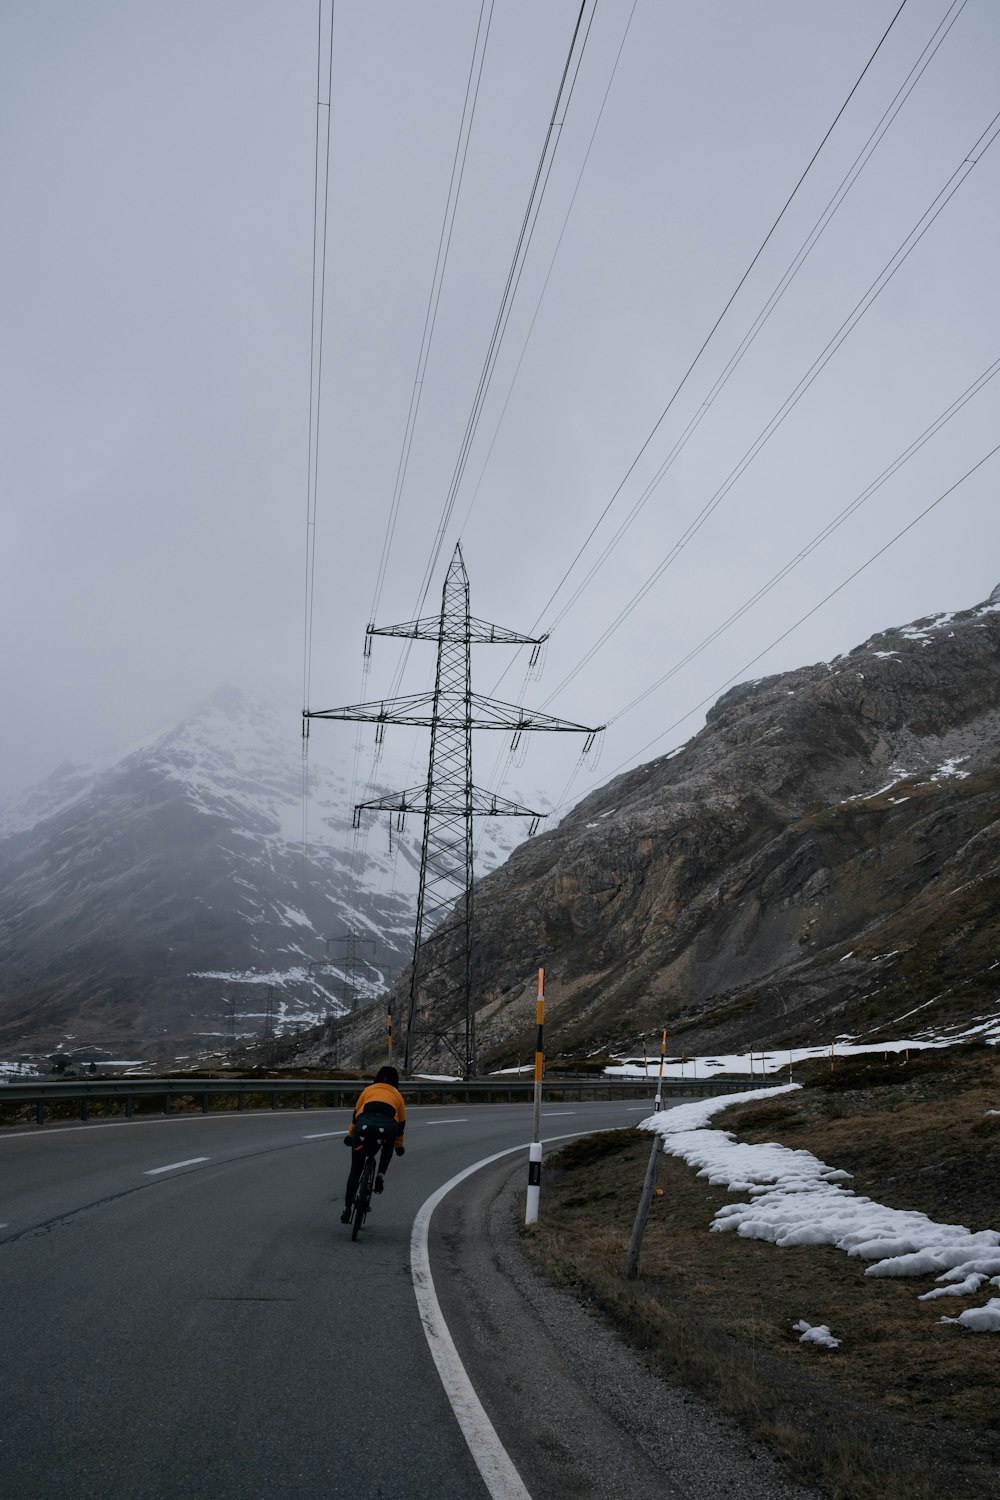 a man riding a bike down a road under power lines